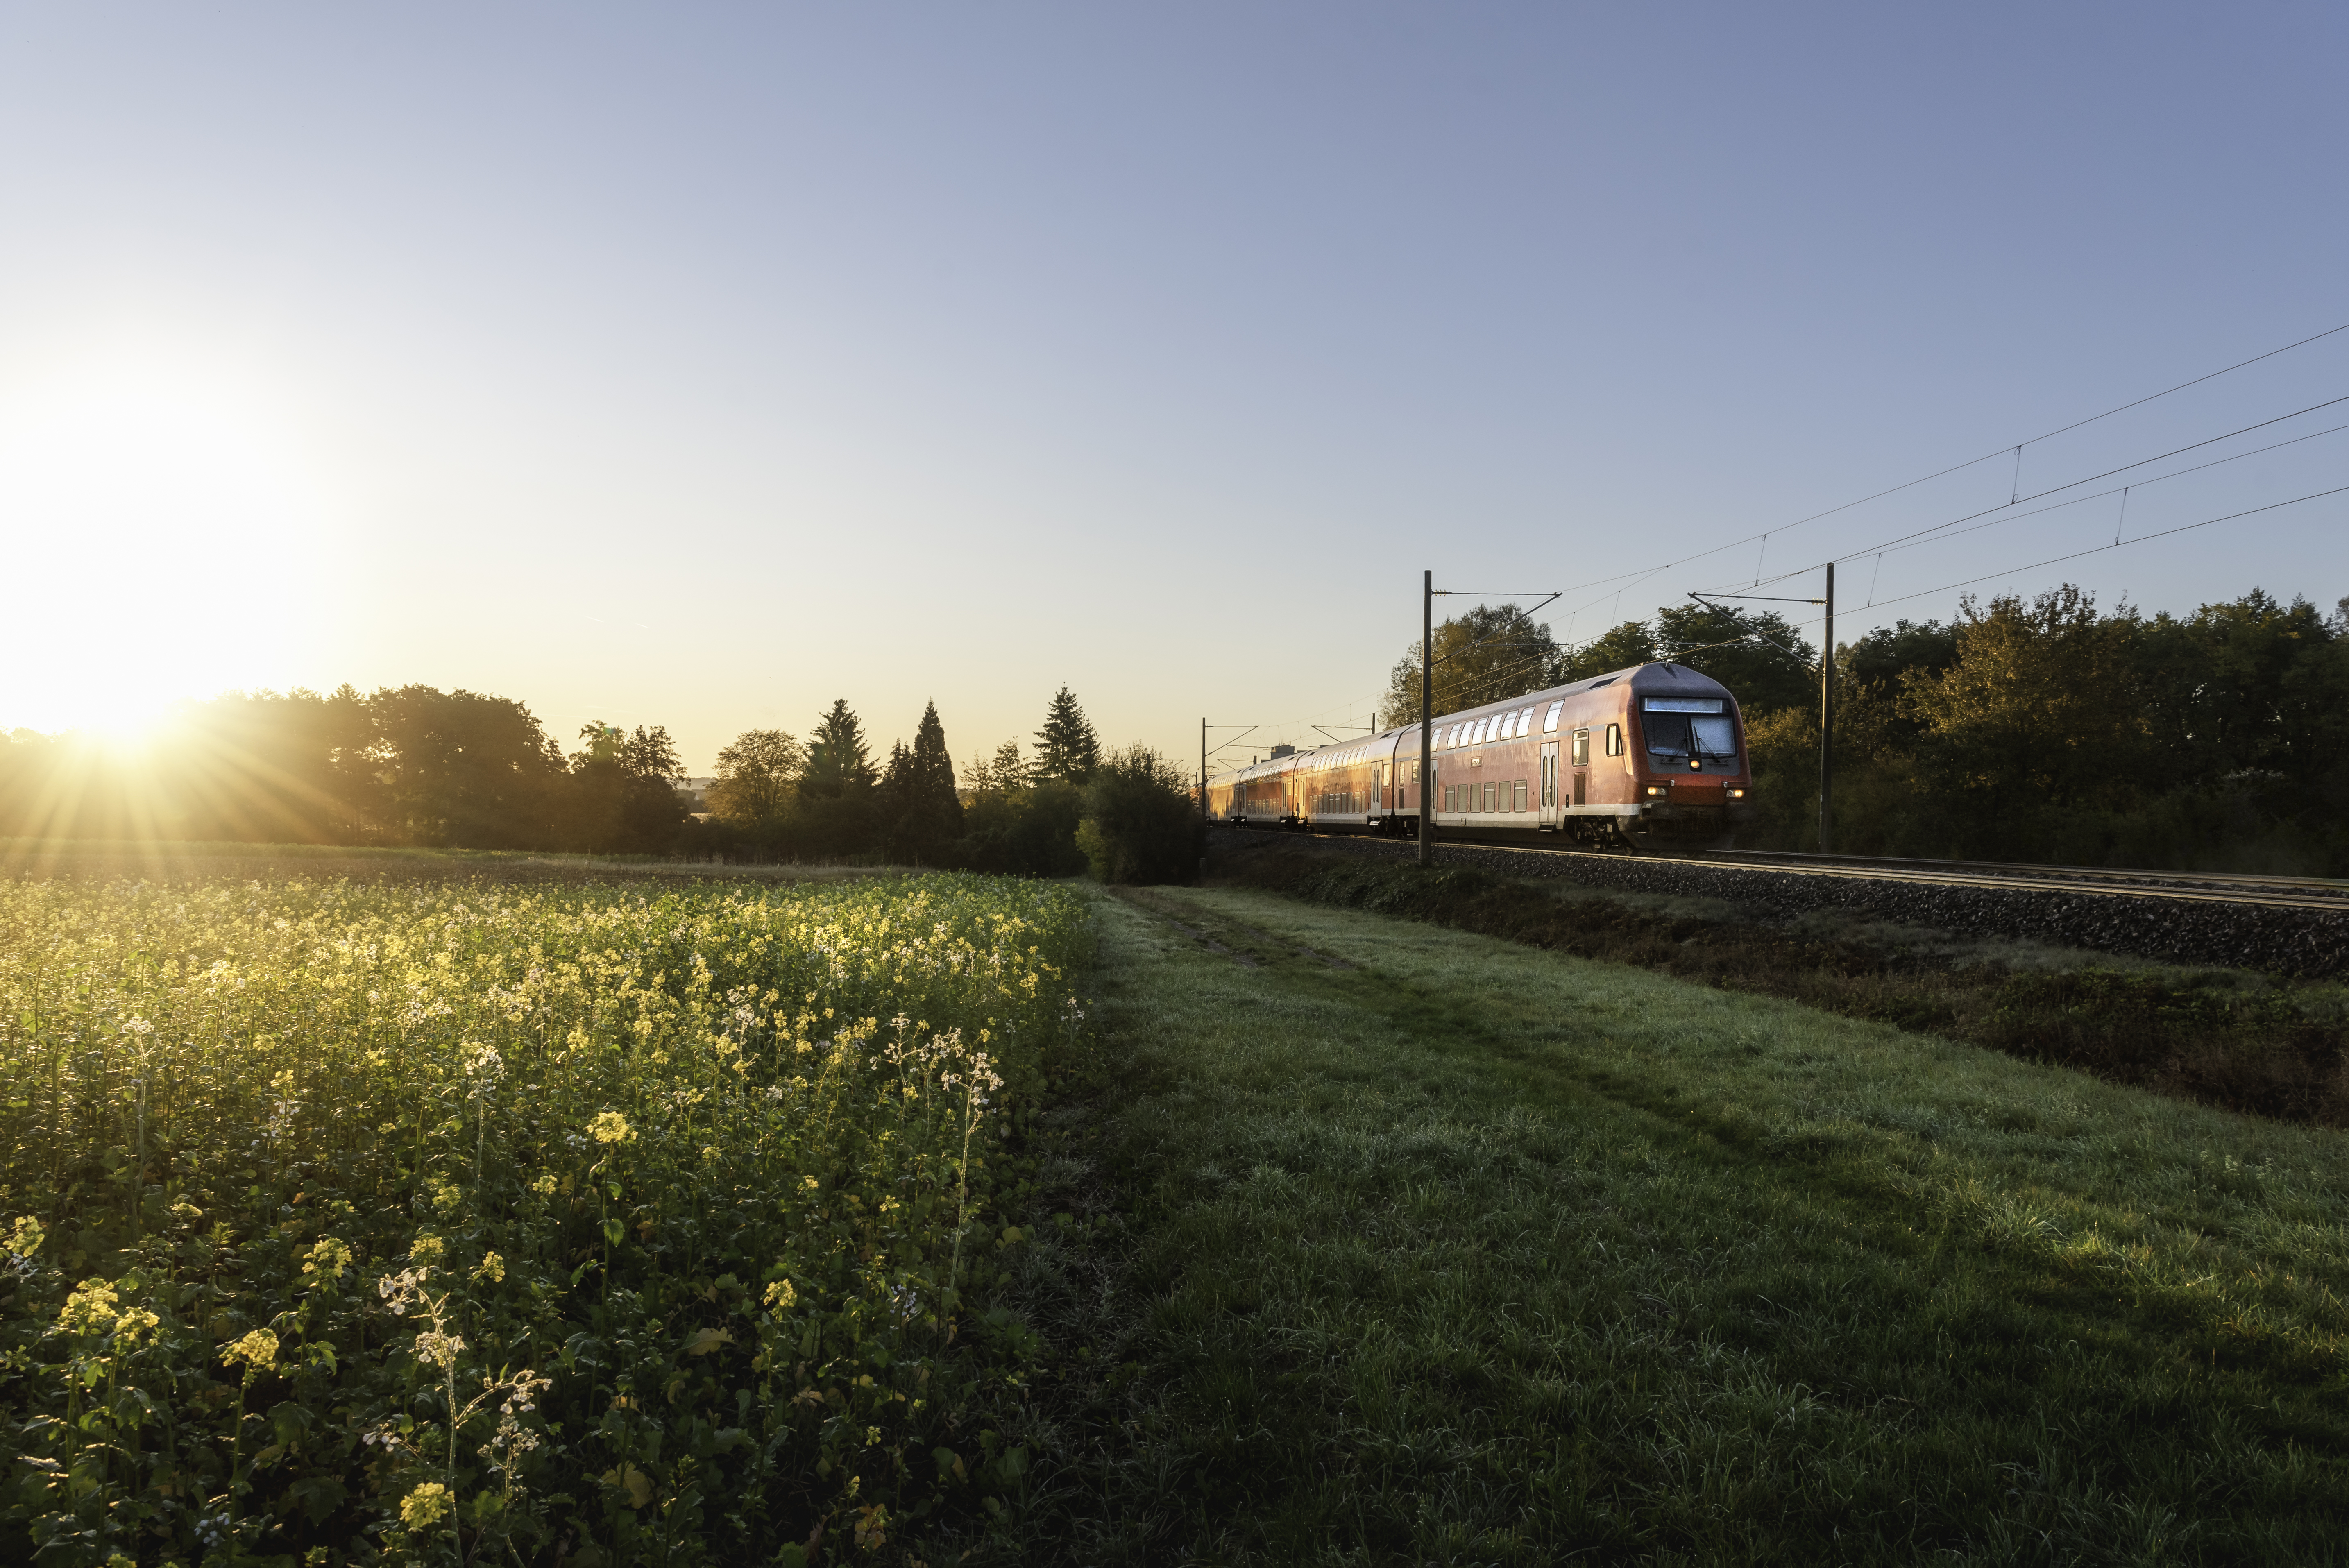 German regional train and rapeseed field at sunrise. Passenger train traveling in spring scenery. Eco-friendly public transport in a rural landscape.